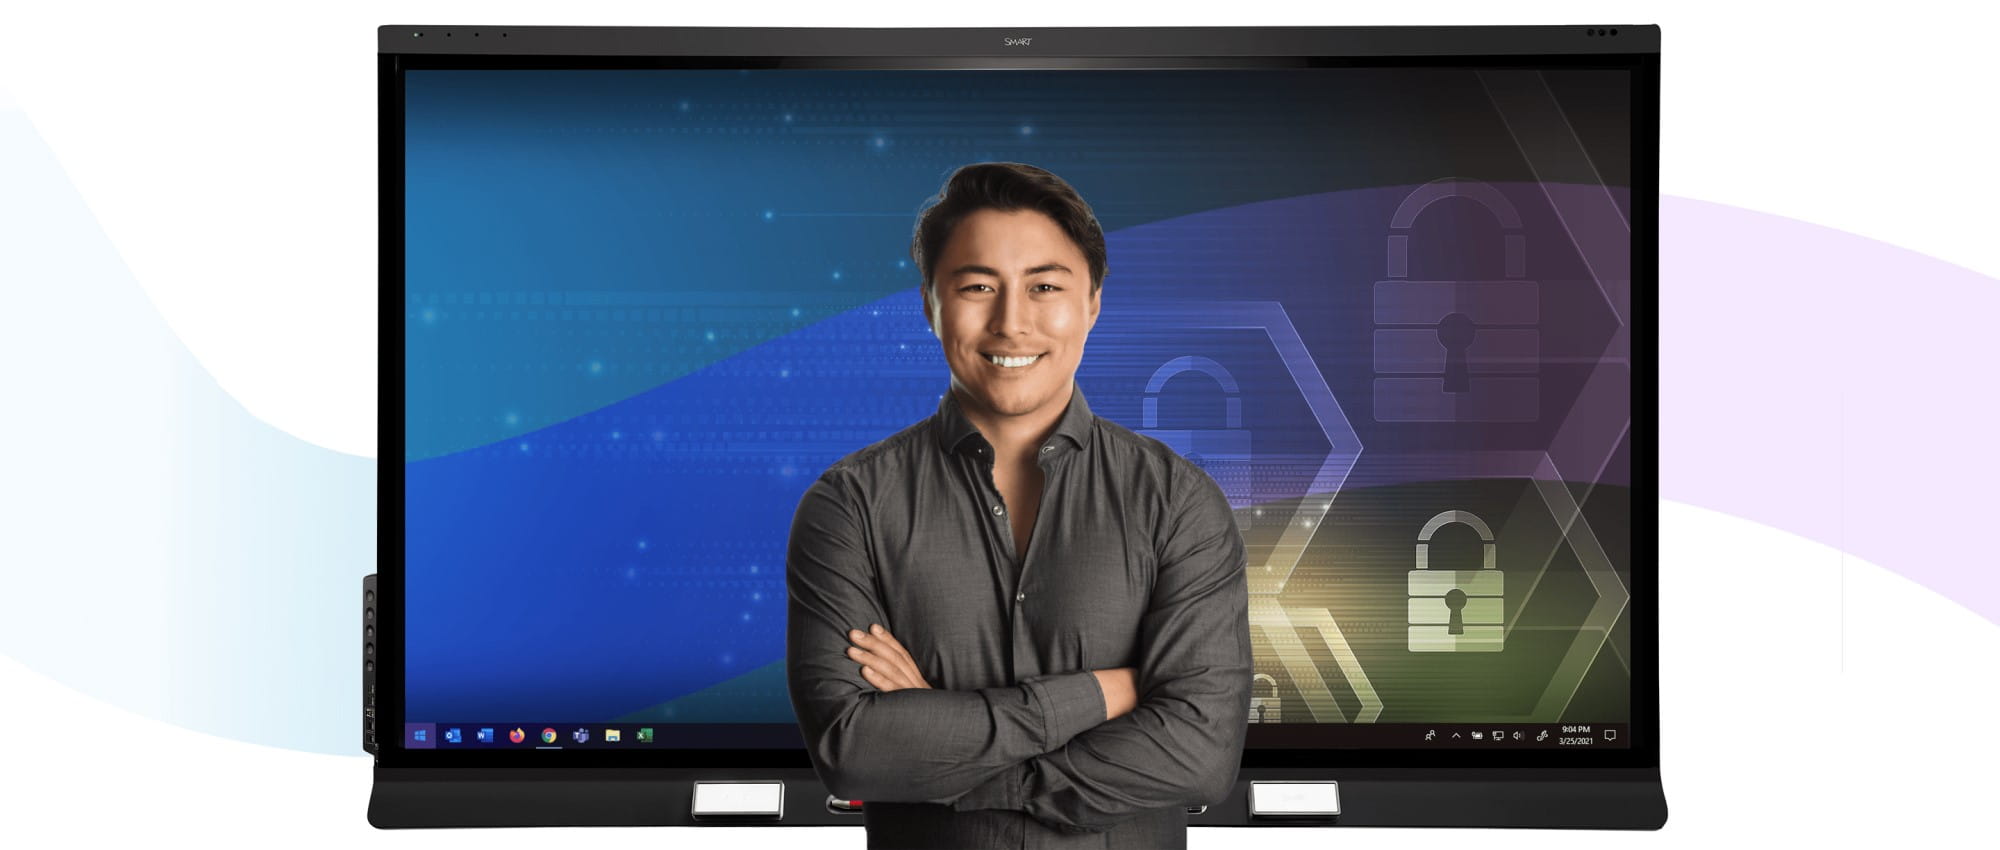 Professional smiling in front of a SMART Board display showcasing security features with lock icons and a vibrant blue digital background.